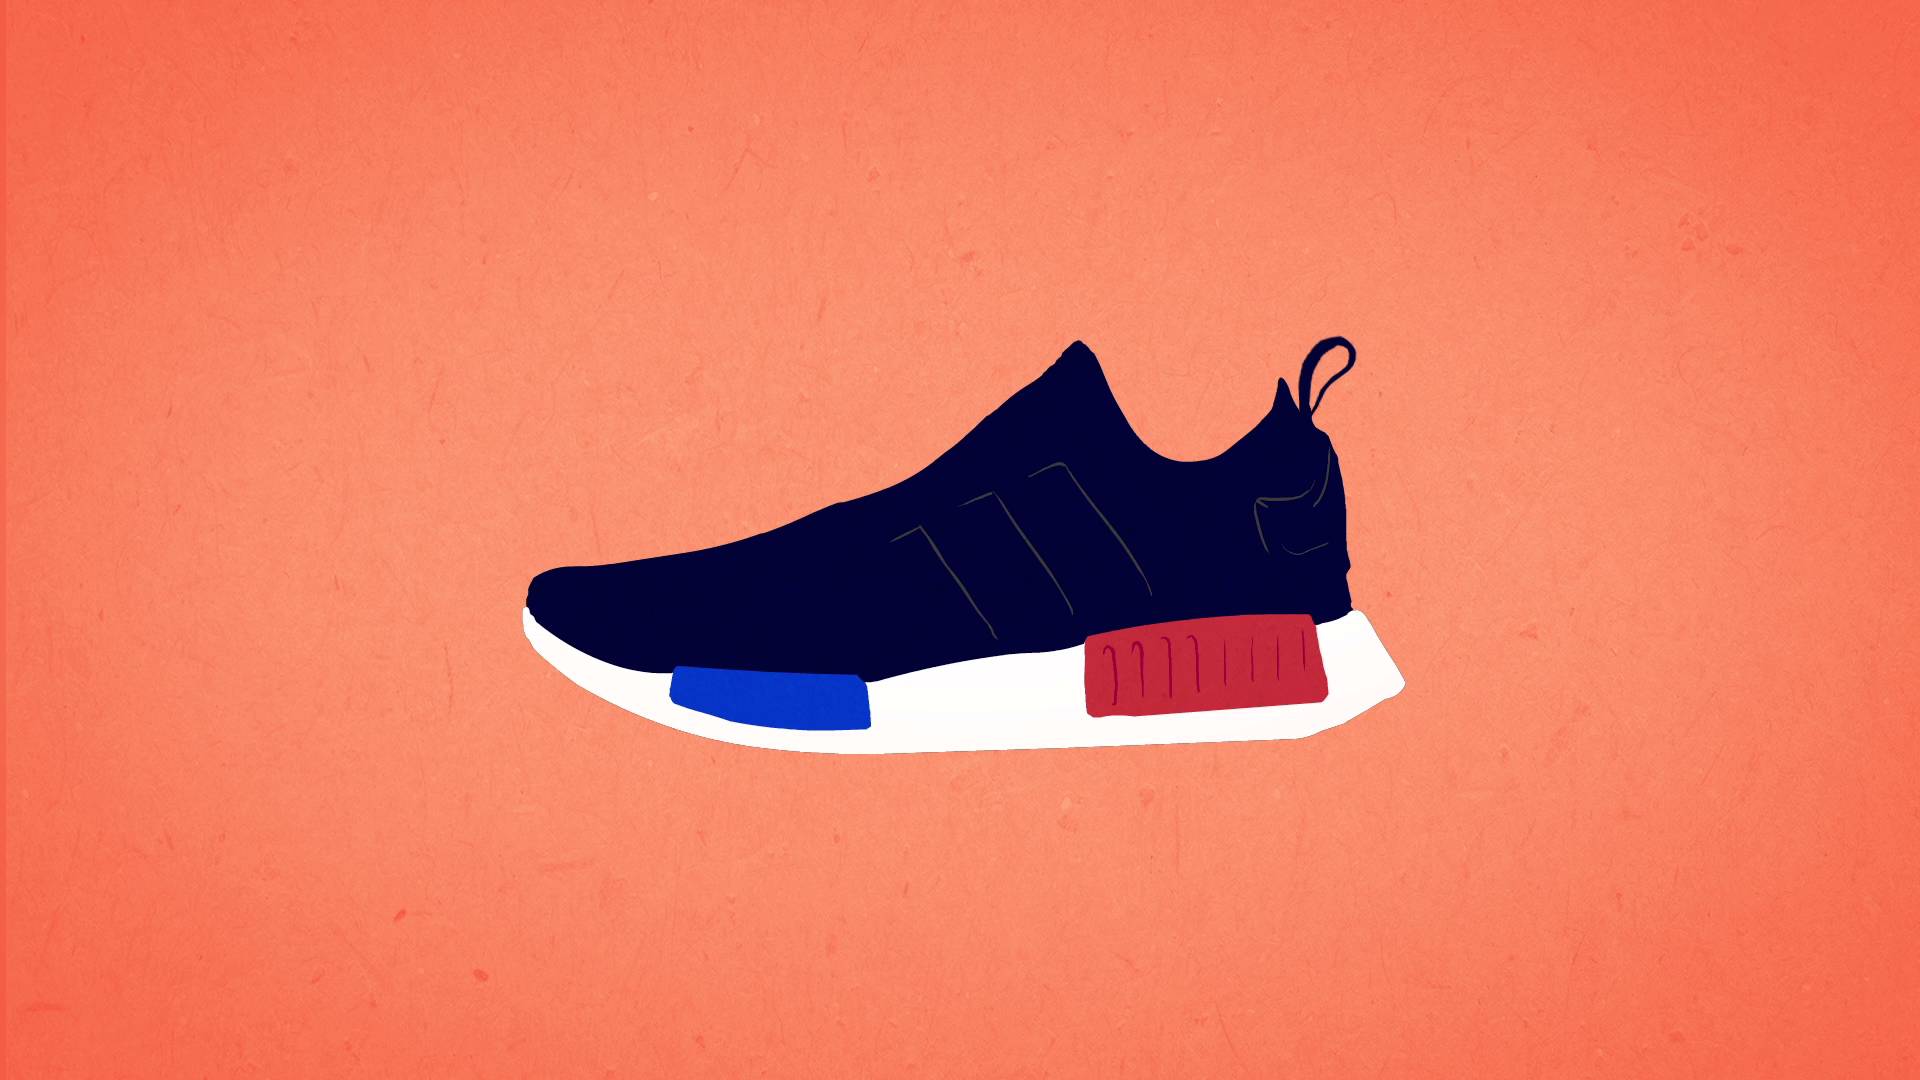 crew traffic Shine Adidas NMD Wallpapers - Wallpaper Cave